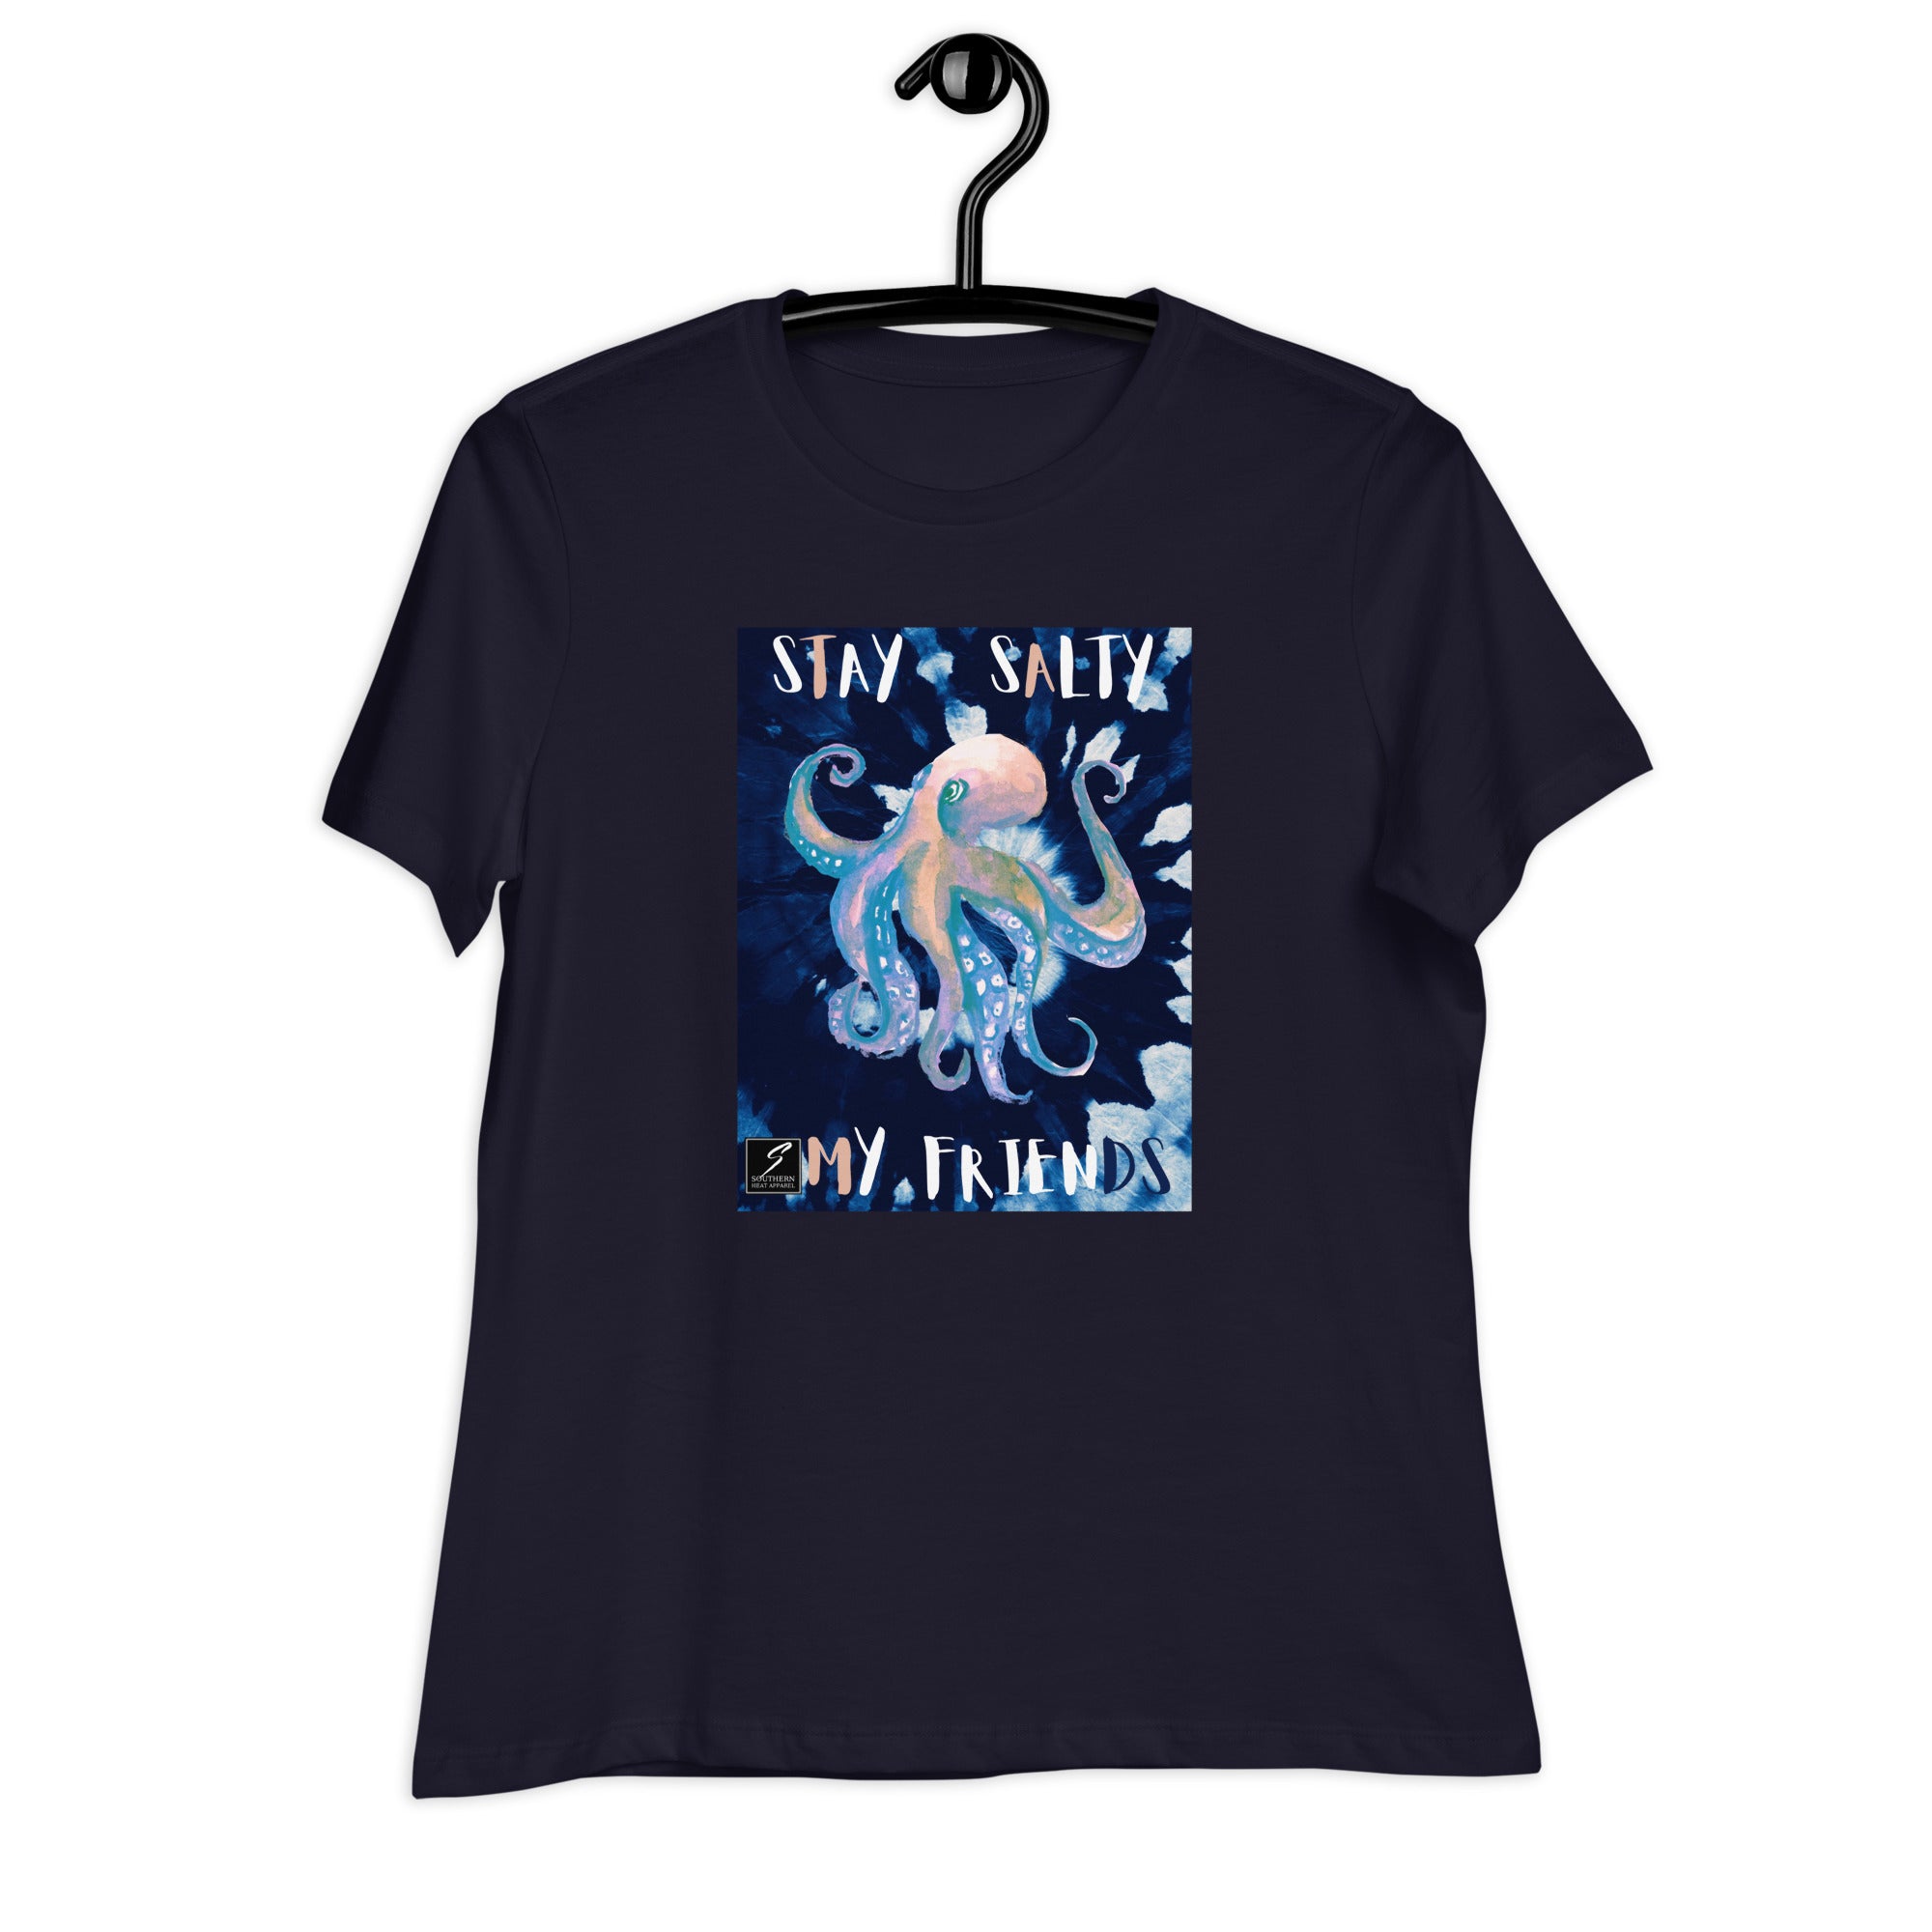 Stay salty-Women's Relaxed T-Shirt